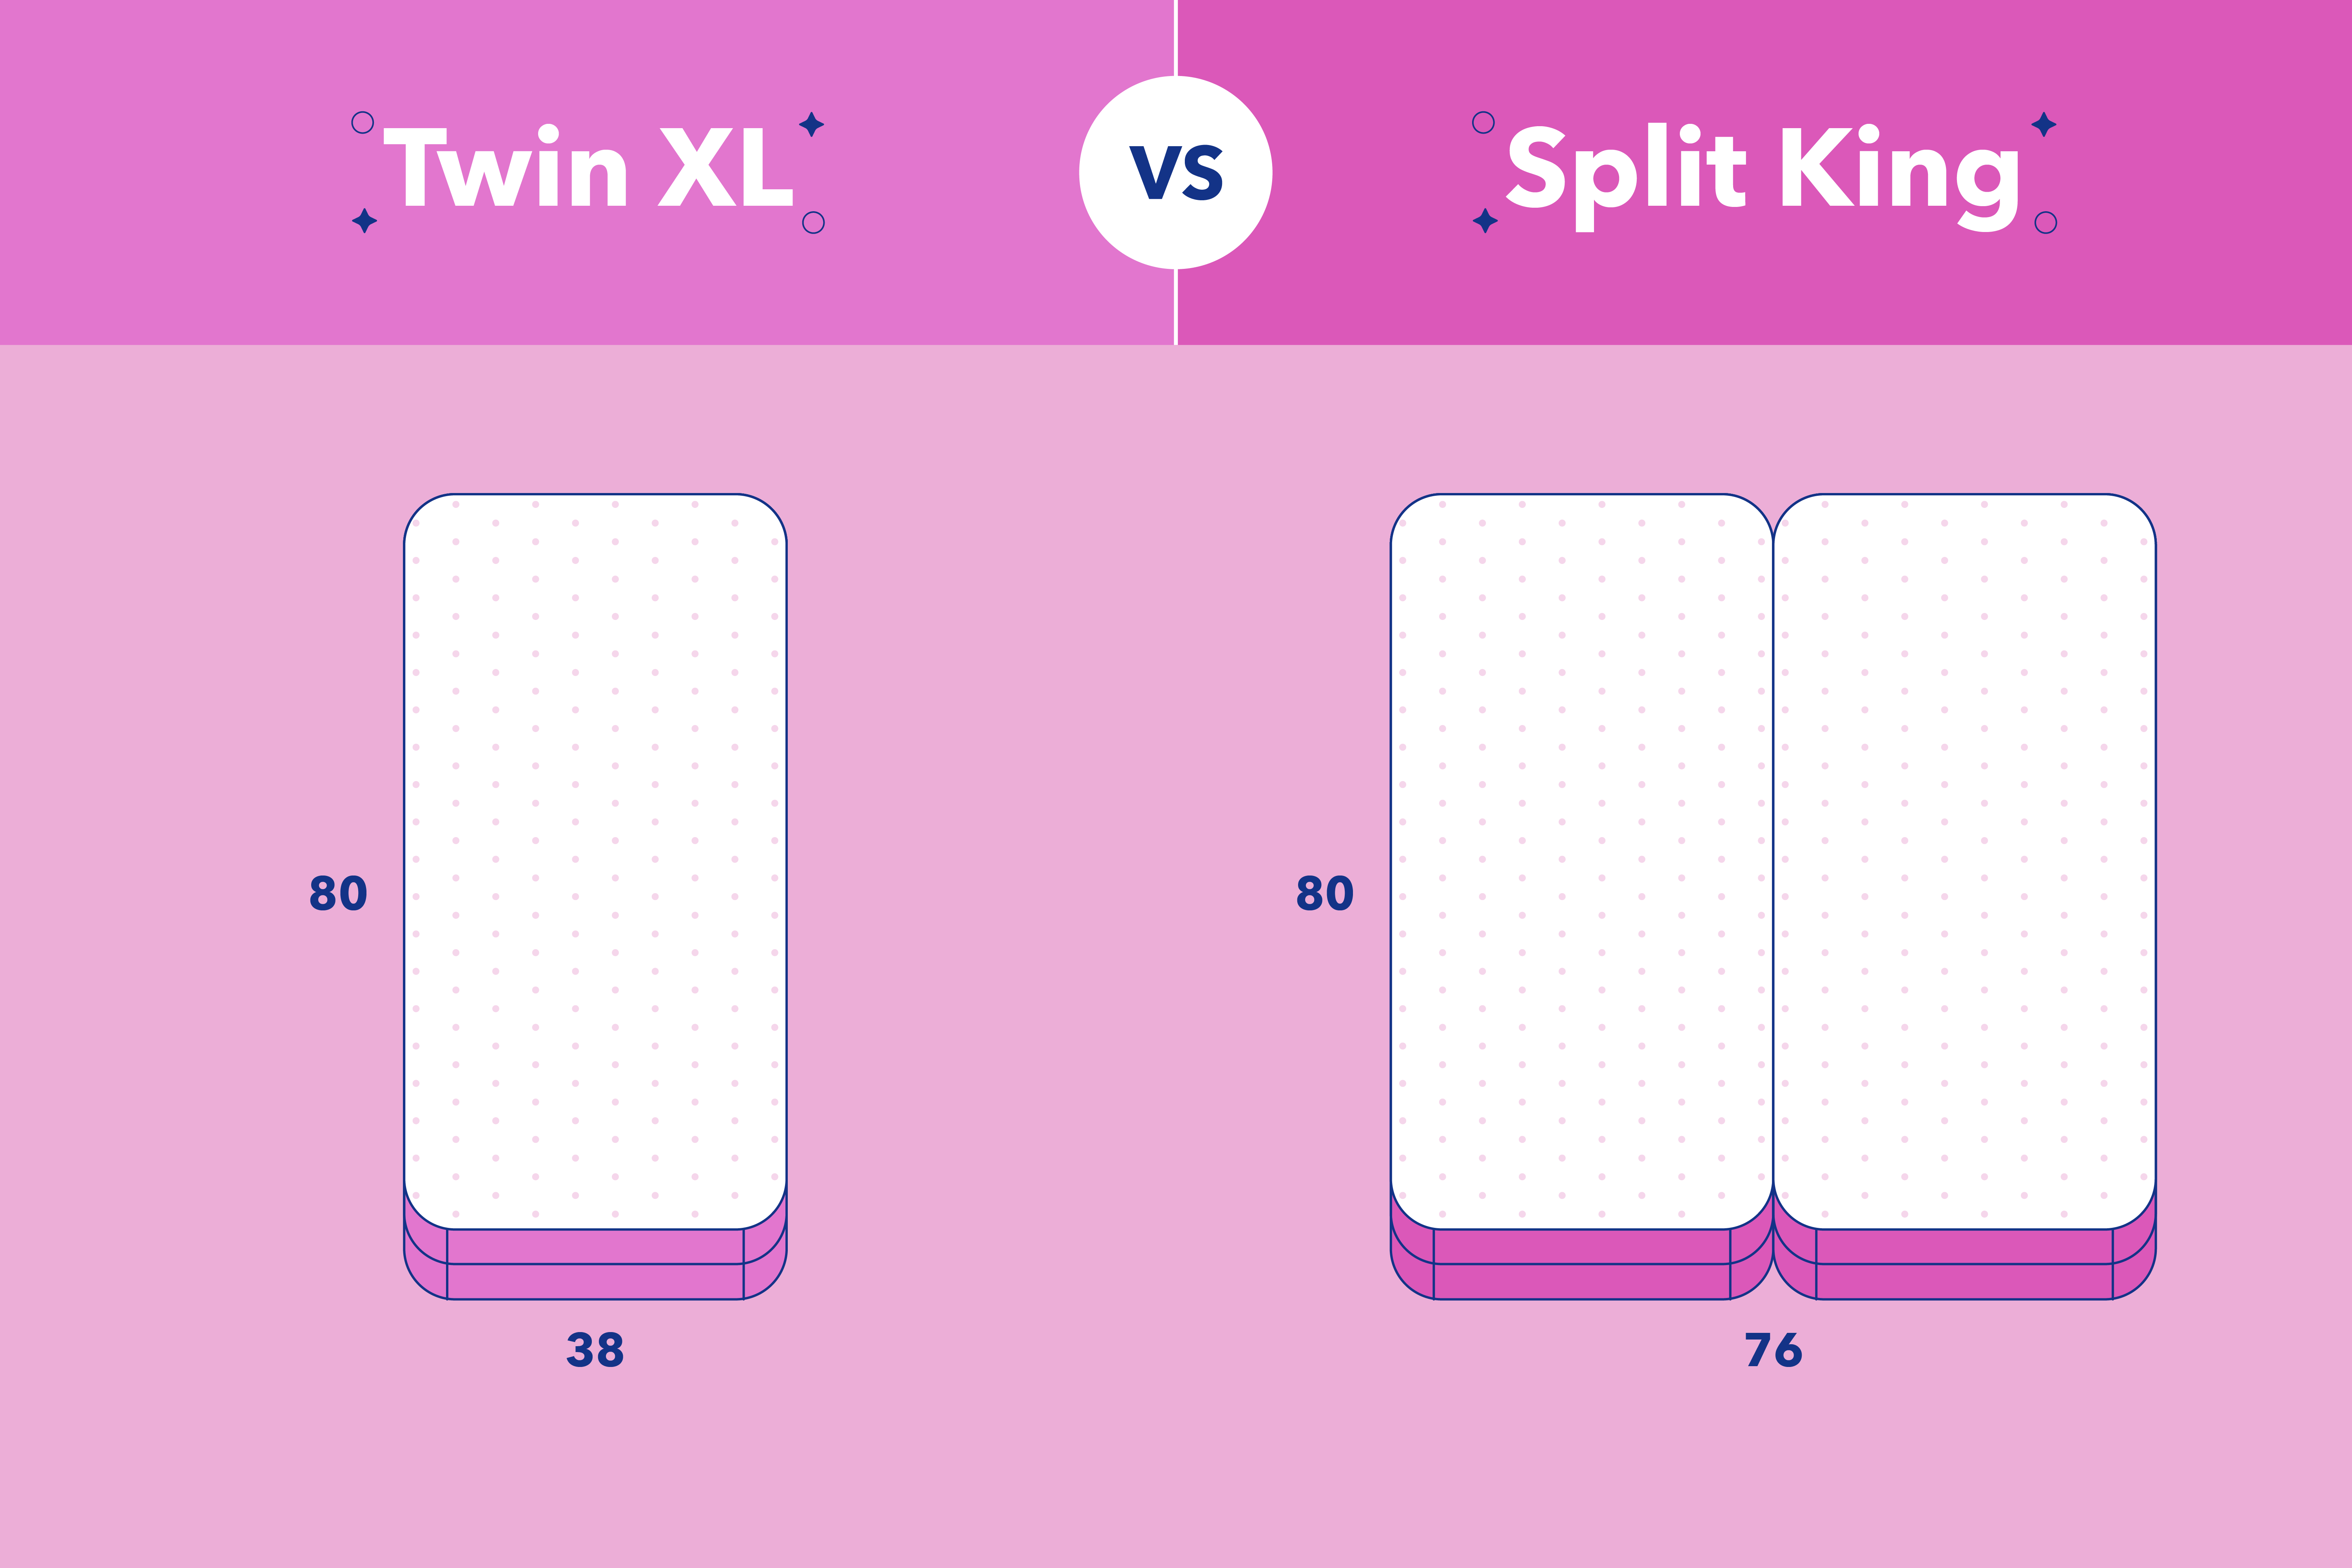 King vs. Split King: What's the Difference?